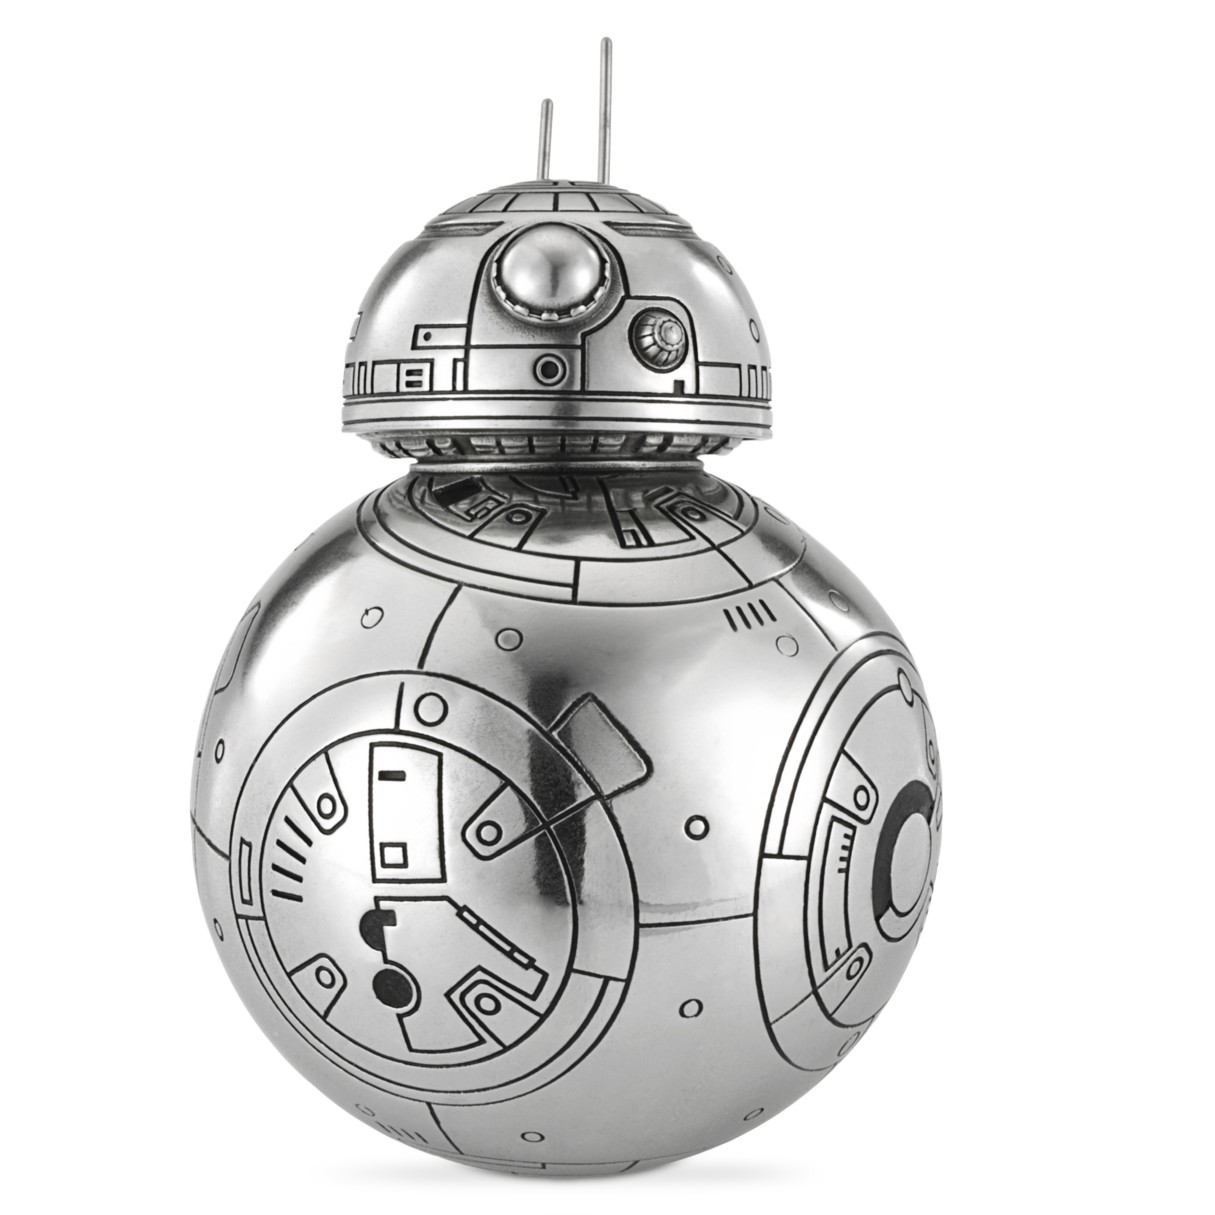 BB-8 Pewter Figurine Container by Royal Selangor – Star Wars